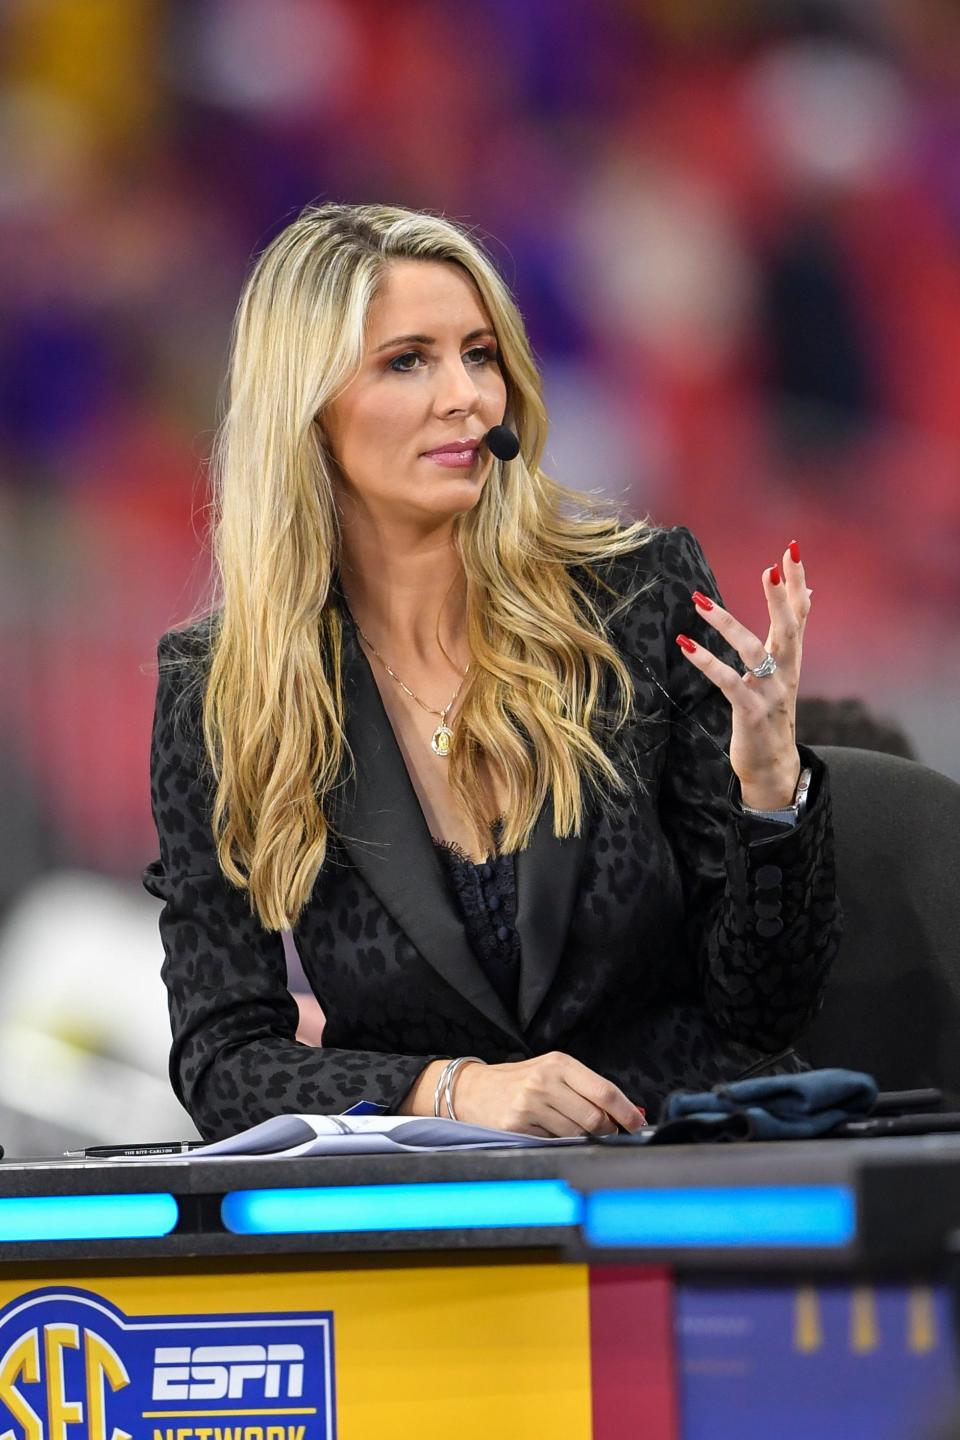 Dec 7, 2019; Atlanta, GA, USA; ESPN commentator Laura Rutledge works on set prior to the the 2019 SEC Championship Game between the Georgia Bulldogs and the LSU Tigers at Mercedes-Benz Stadium. Mandatory Credit: Dale Zanine-USA TODAY Sports